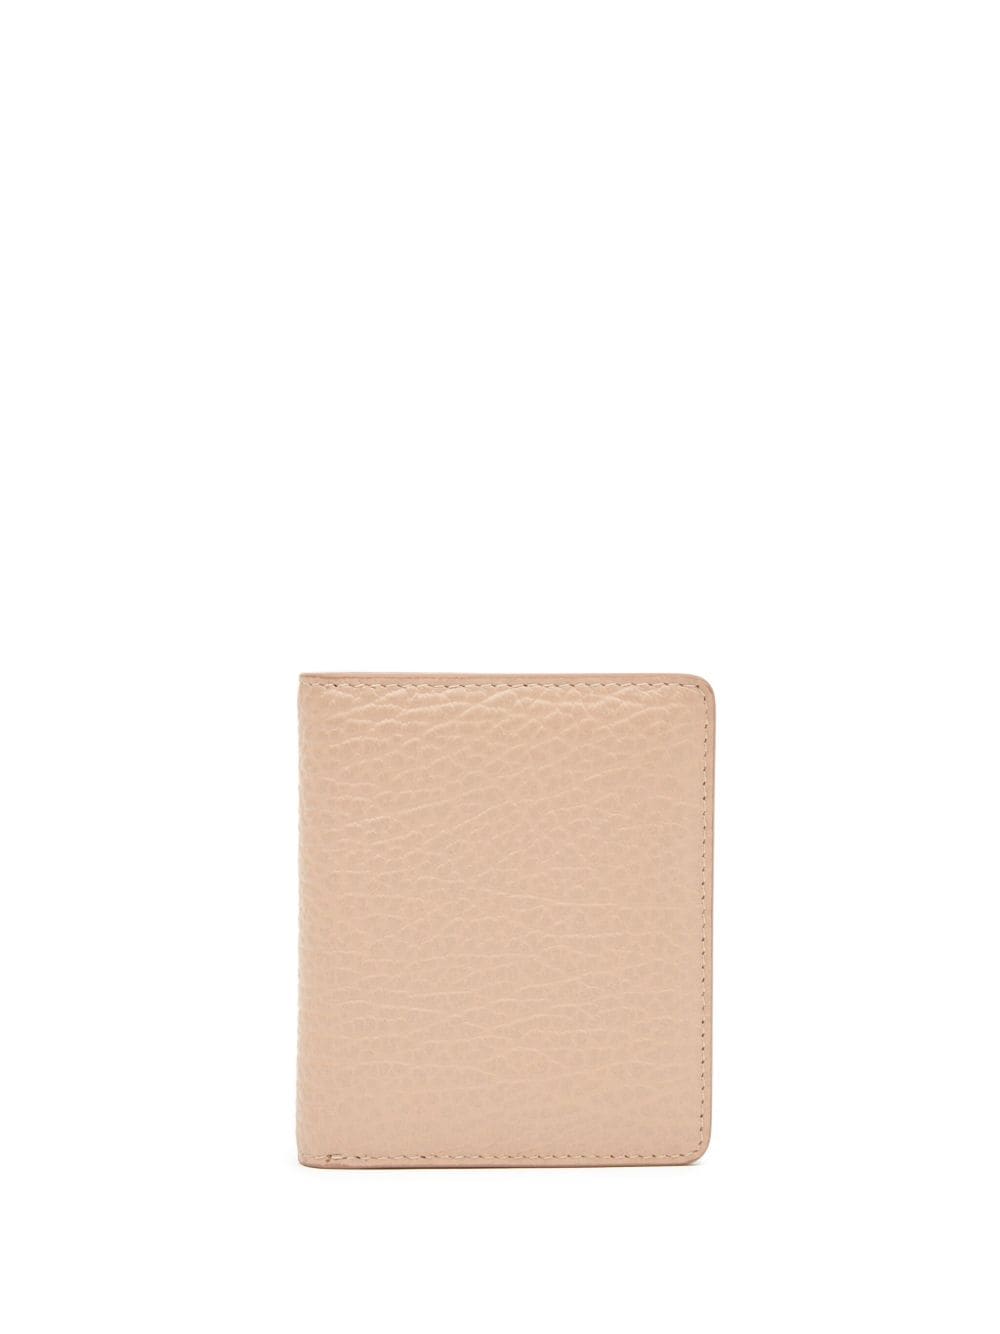 four-stitch leather wallet-1